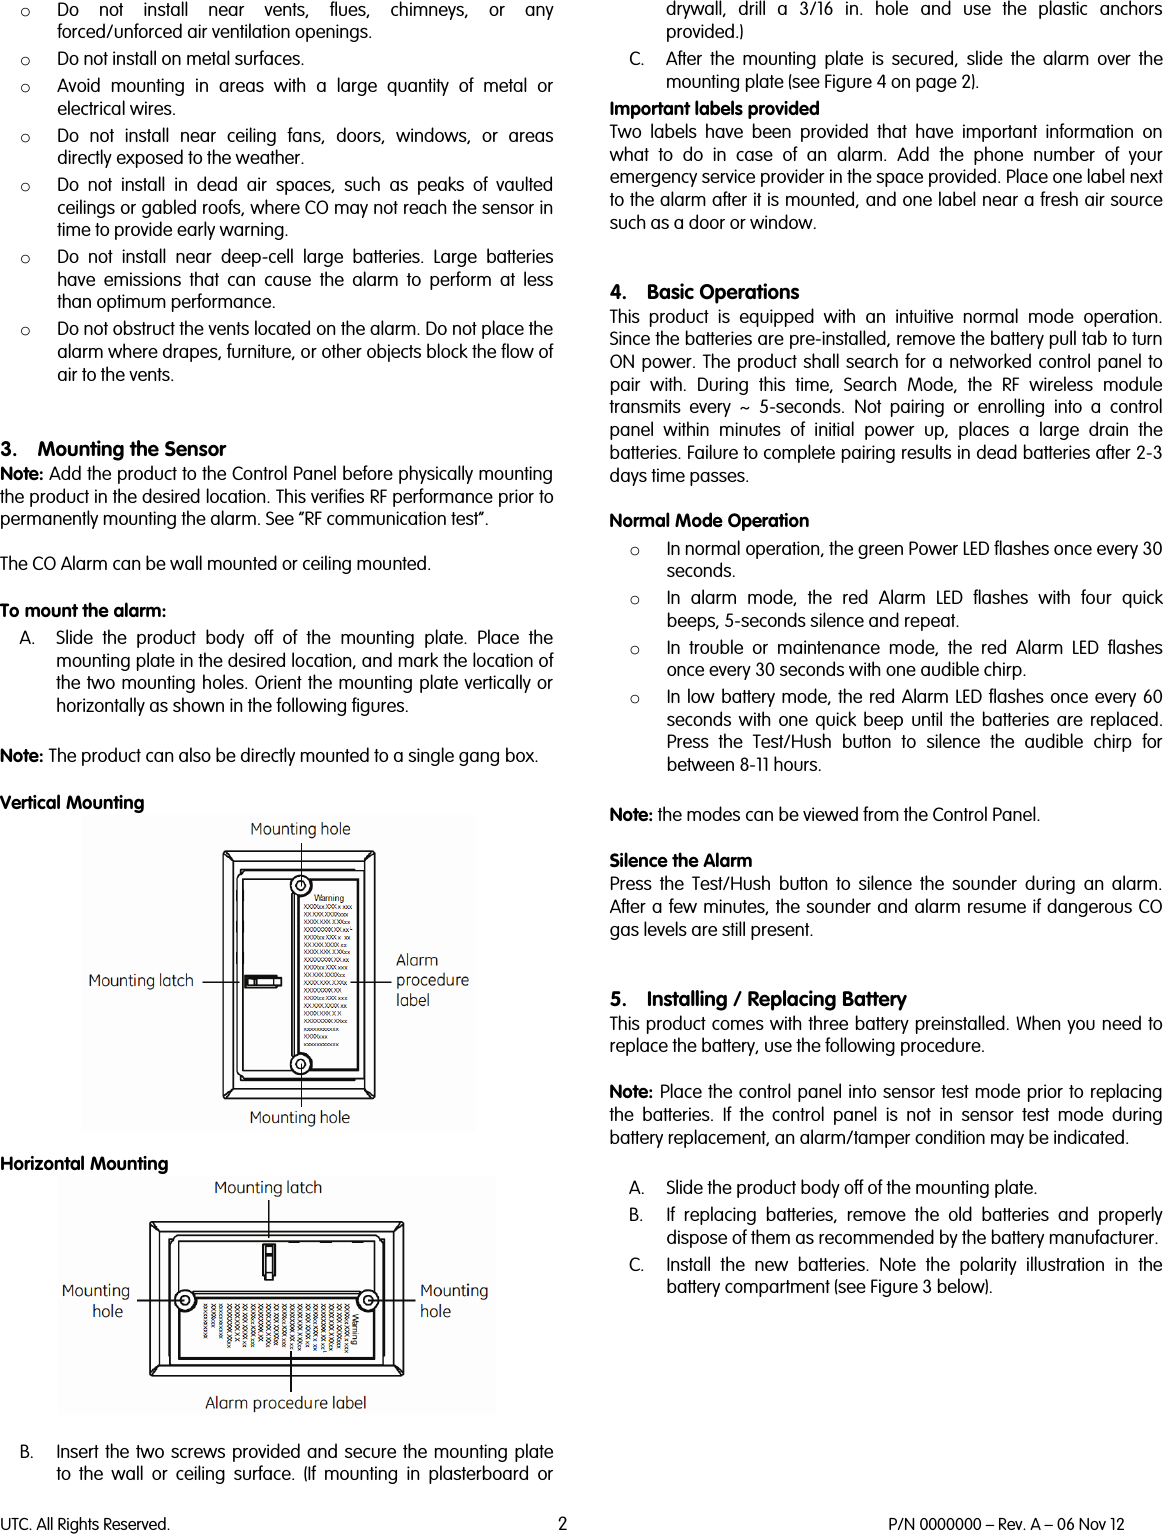 UTC. All Rights Reserved. 2 P/N 0000000 – Rev. A – 06 Nov 12  o Do not install near vents, flues, chimneys, or any forced/unforced air ventilation openings.  o Do not install on metal surfaces.  o Avoid mounting in areas with a large quantity of metal or electrical wires.  o Do not install near ceiling fans, doors, windows, or areas directly exposed to the weather.  o Do not install in dead air spaces, such as peaks of vaulted ceilings or gabled roofs, where CO may not reach the sensor in time to provide early warning.  o Do not install near deep-cell large batteries. Large batteries have emissions that can cause the alarm to perform at less than optimum performance.  o Do not obstruct the vents located on the alarm. Do not place the alarm where drapes, furniture, or other objects block the flow of air to the vents.    3. Mounting the Sensor Note: Add the product to the Control Panel before physically mounting the product in the desired location. This verifies RF performance prior to permanently mounting the alarm. See “RF communication test”.  The CO Alarm can be wall mounted or ceiling mounted.   To mount the alarm:  A. Slide the product body off of the mounting plate. Place the mounting plate in the desired location, and mark the location of the two mounting holes. Orient the mounting plate vertically or horizontally as shown in the following figures.   Note: The product can also be directly mounted to a single gang box.   Vertical Mounting   Horizontal Mounting   B. Insert the two screws provided and secure the mounting plate to the wall or ceiling surface. (If mounting in plasterboard or drywall, drill a 3/16 in. hole and use the plastic anchors provided.)  C. After the mounting plate is secured, slide the alarm over the mounting plate (see Figure 4 on page 2).  Important labels provided  Two labels have been provided that have important information on what to do in case of an alarm. Add the phone number of your emergency service provider in the space provided. Place one label next to the alarm after it is mounted, and one label near a fresh air source such as a door or window.    4. Basic Operations This  product is equipped with an intuitive normal mode operation. Since the batteries are pre-installed, remove the battery pull tab to turn ON power. The product shall search for a networked control panel to pair with. During this time, Search Mode, the RF wireless module transmits every ~ 5-seconds.  Not pairing or enrolling into a control panel within minutes of initial power up, places a large drain the batteries. Failure to complete pairing results in dead batteries after 2-3 days time passes.   Normal Mode Operation o In normal operation, the green Power LED flashes once every 30 seconds. o In alarm mode, the red Alarm LED flashes with four quick beeps, 5-seconds silence and repeat. o In trouble or maintenance mode, the red Alarm LED flashes once every 30 seconds with one audible chirp. o In low battery mode, the red Alarm LED flashes once every 60 seconds with one quick beep until the batteries are replaced. Press the Test/Hush button to silence the audible chirp for between 8-11 hours.   Note: the modes can be viewed from the Control Panel.  Silence the Alarm Press the Test/Hush button to silence the sounder during an alarm. After a few minutes, the sounder and alarm resume if dangerous CO gas levels are still present.   5. Installing / Replacing Battery This product comes with three battery preinstalled. When you need to replace the battery, use the following procedure.   Note: Place the control panel into sensor test mode prior to replacing the batteries. If the control panel is not in sensor test mode during battery replacement, an alarm/tamper condition may be indicated.   A. Slide the product body off of the mounting plate.  B. If replacing batteries, remove the old batteries and properly dispose of them as recommended by the battery manufacturer.  C. Install the new batteries. Note the polarity illustration in the battery compartment (see Figure 3 below).   